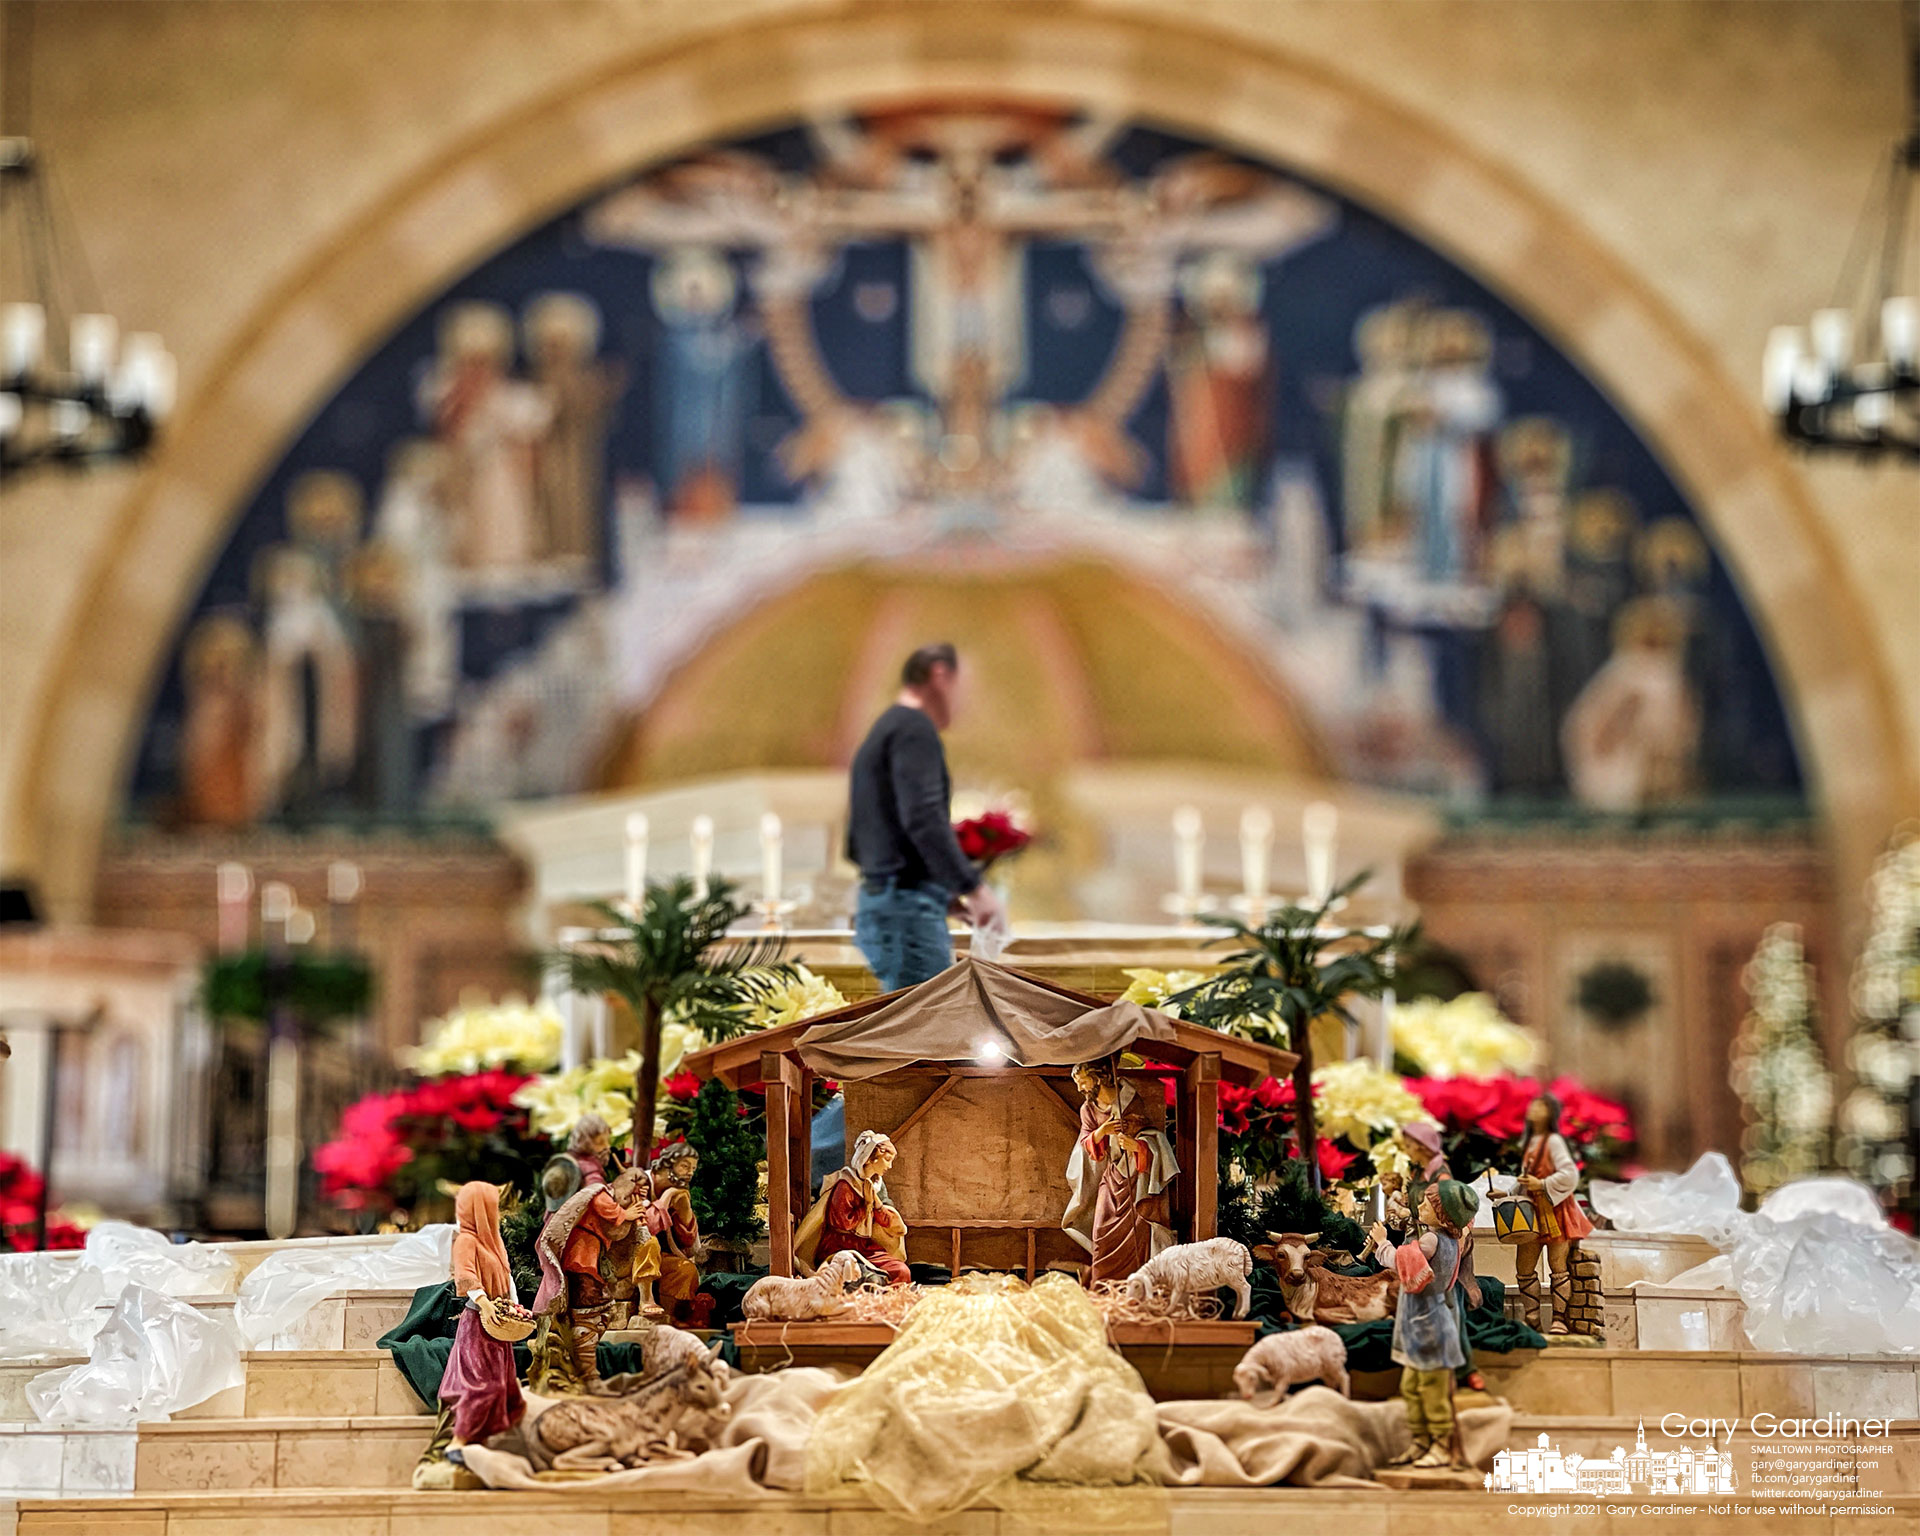 A volunteer arranges flowers around the altar and creche at St. Paul the Apostle Church in preparation for Christmas Masses. My Final Photo for Dec. 23, 2021.